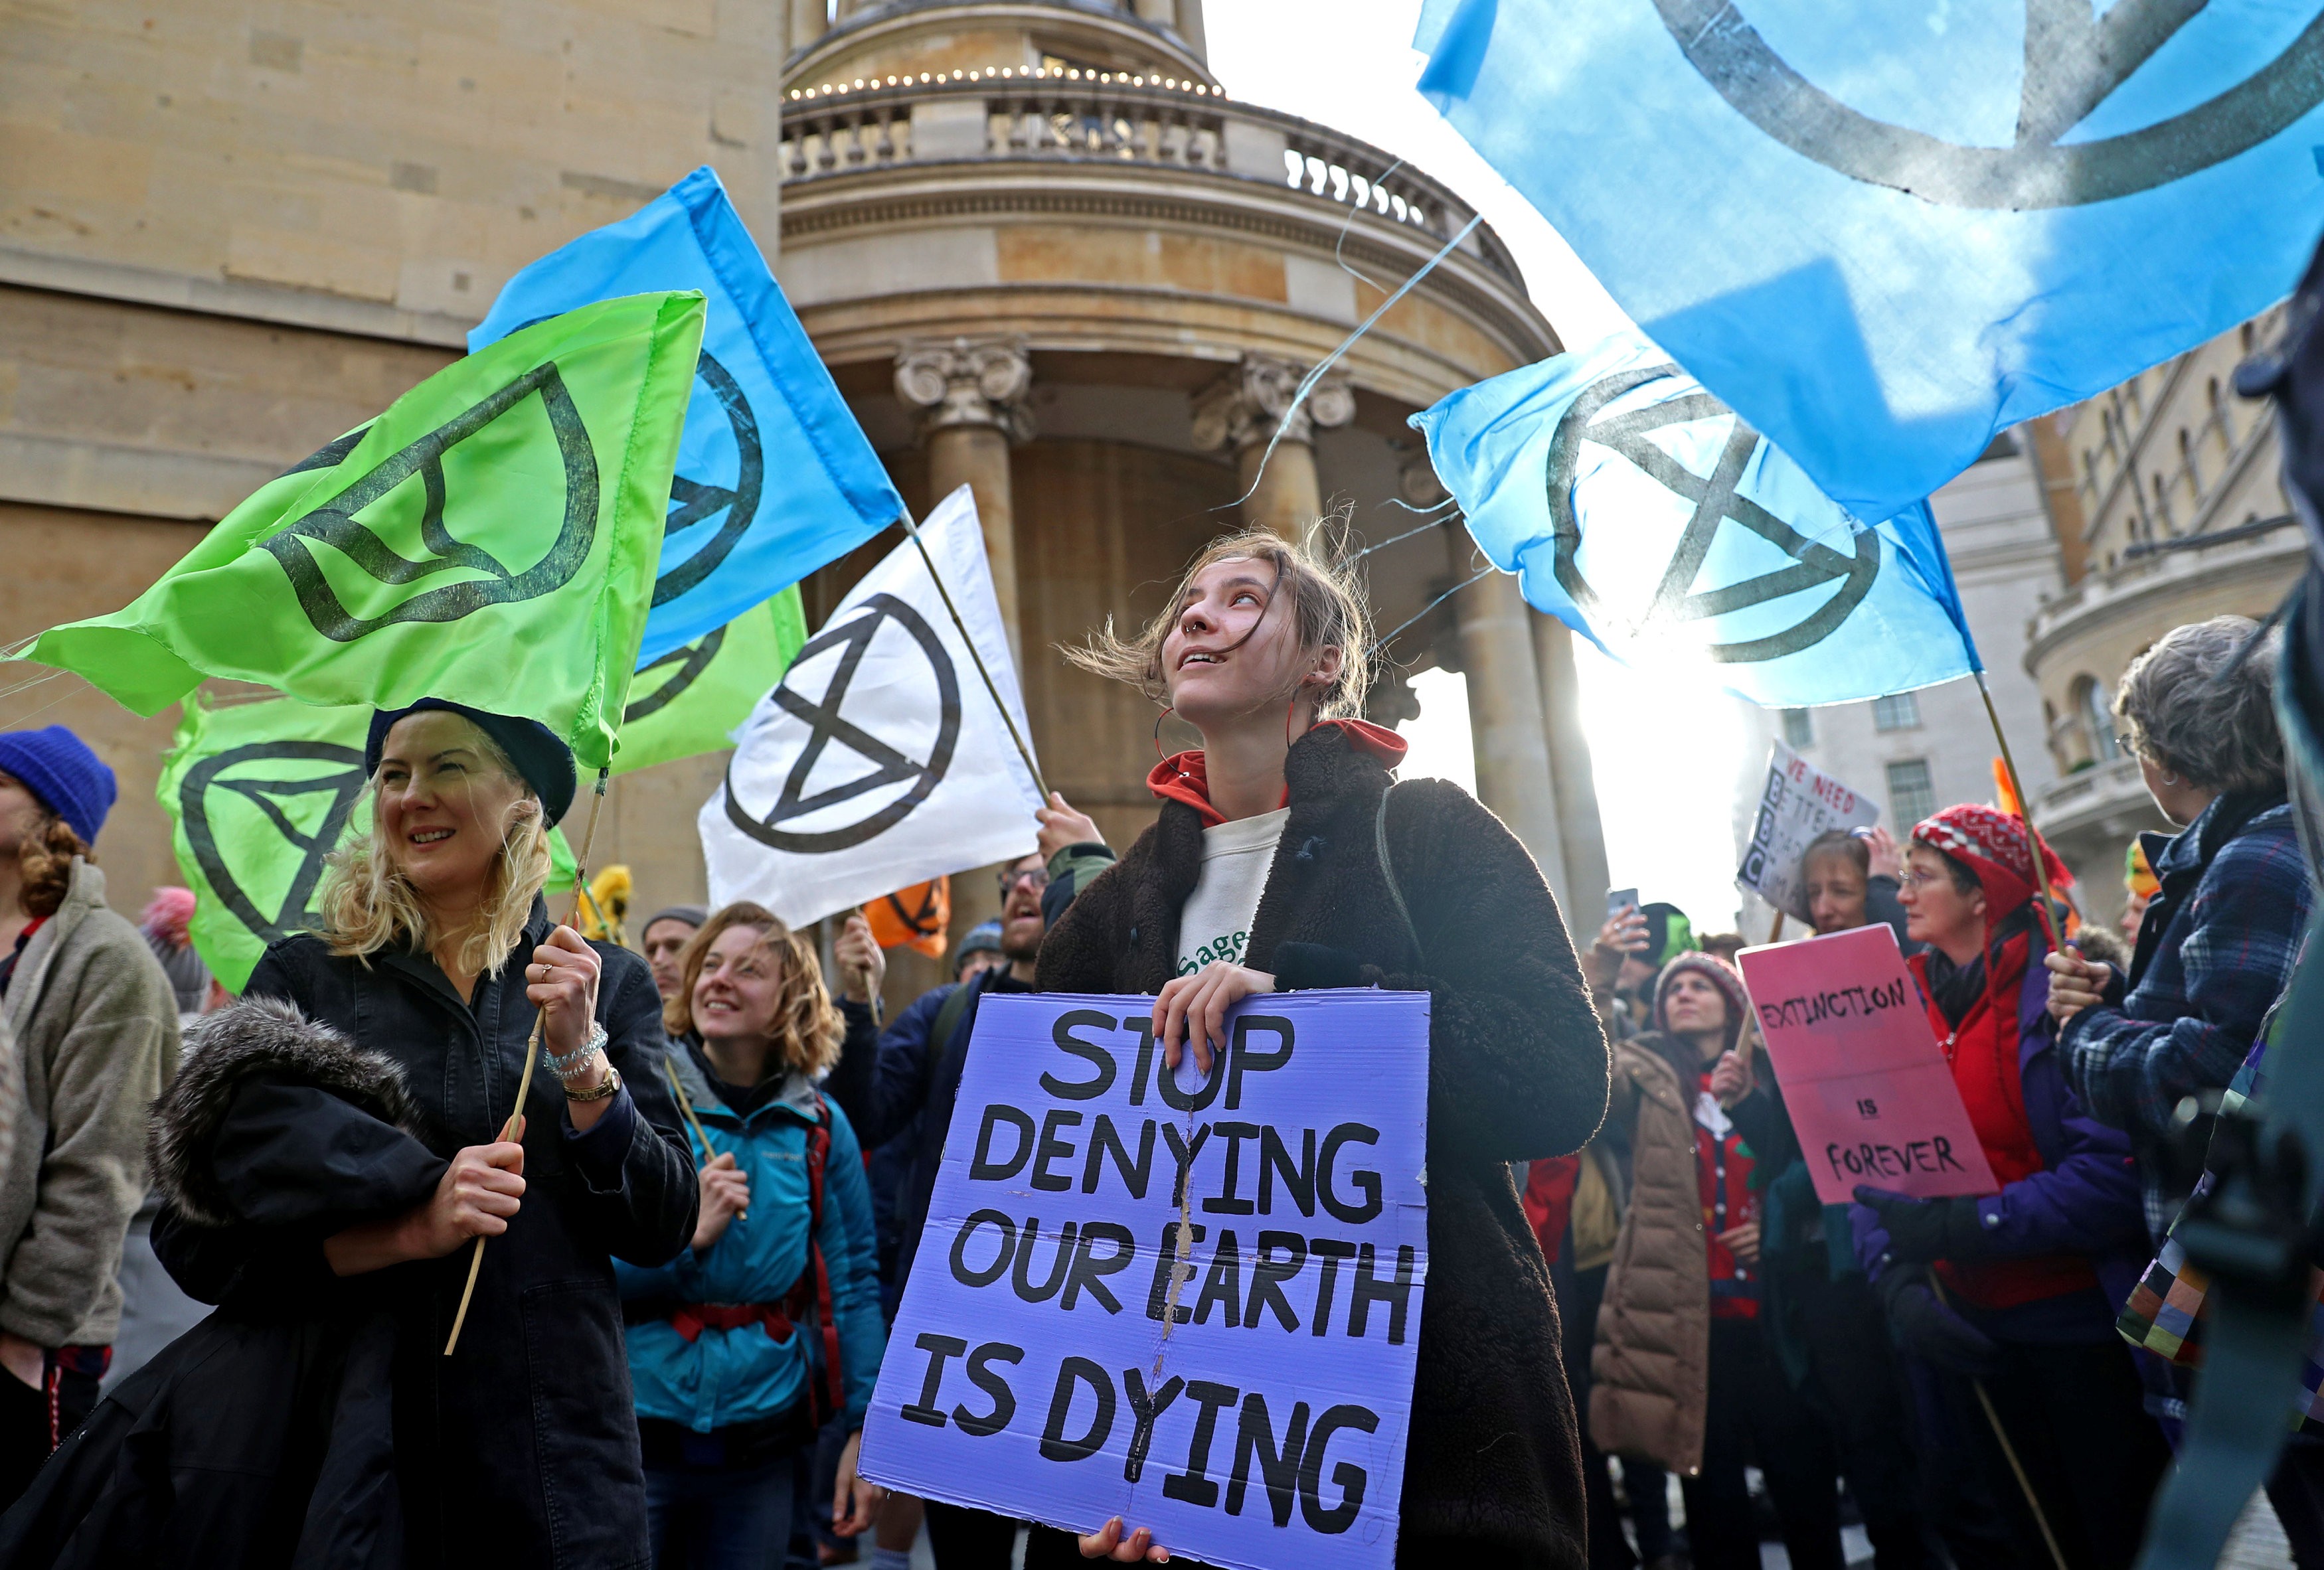 Protesters from the climate change pressure group Extinction Rebellion demonstrate outside the BBC offices in central London on December 21. They called on the broadcaster to give top priority to climate change and environmental issues, in both editorial coverage and corporate management. Photo: Reuters